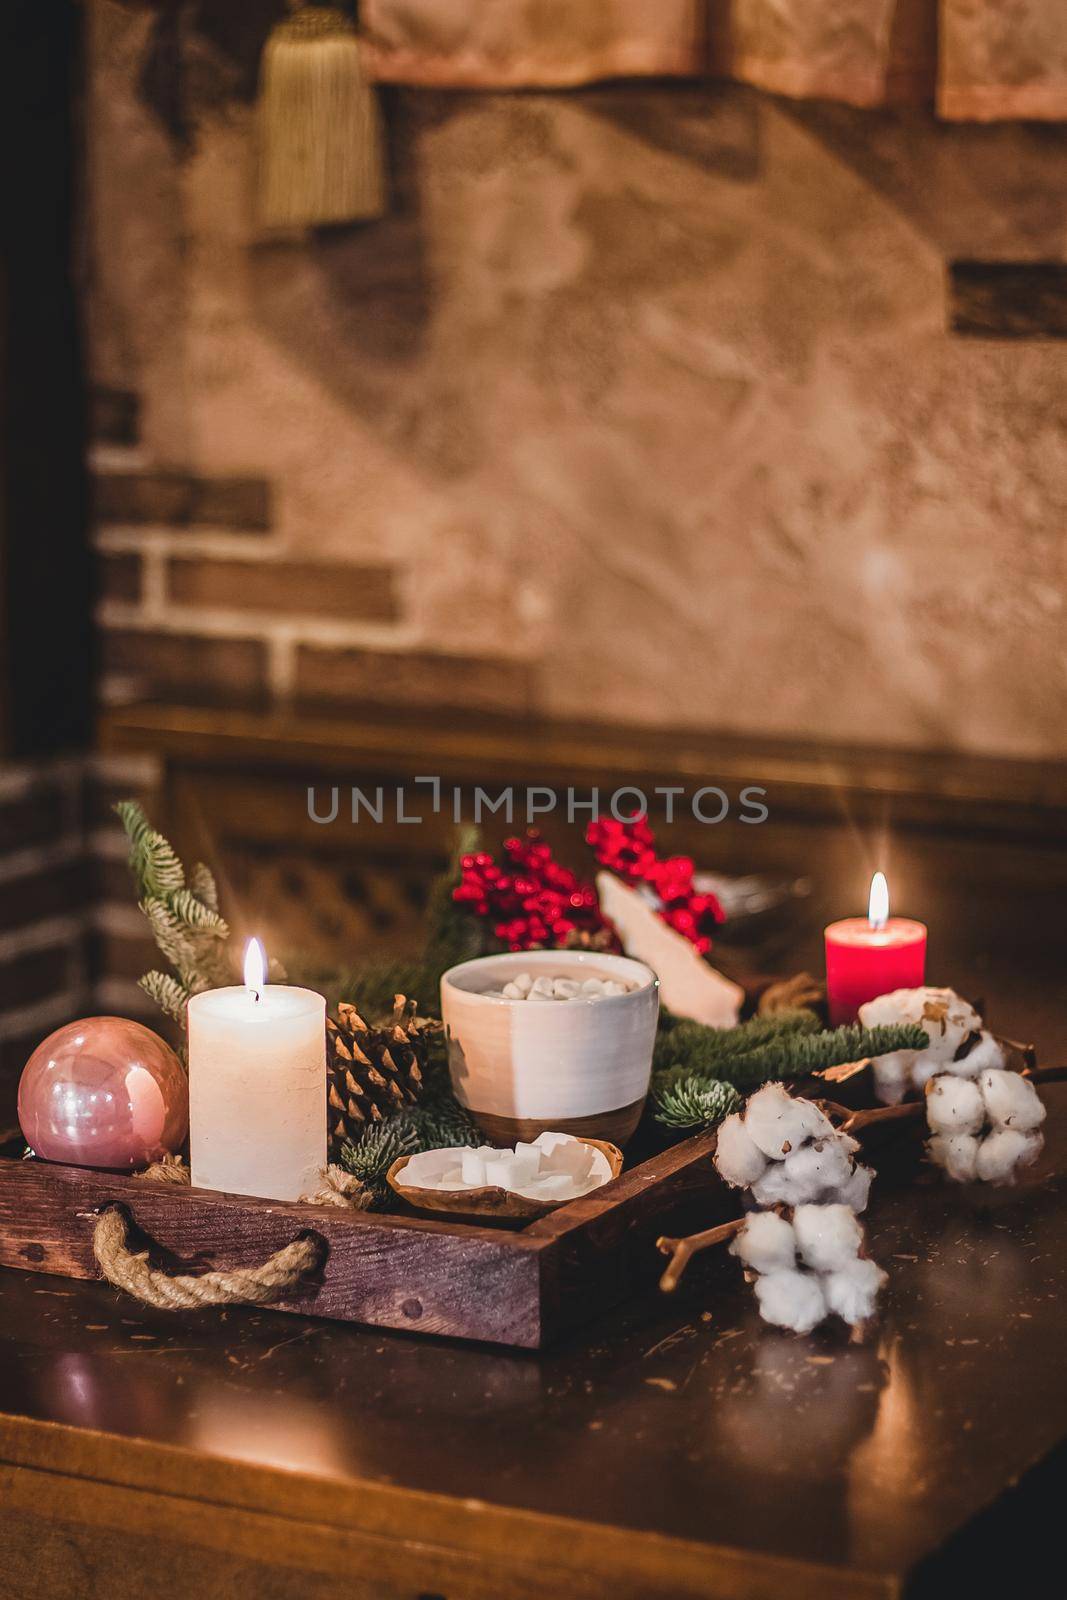 Christmas hot chocolate with mini marshmellows in an old ceramic mug with candles on a wooden background by mmp1206